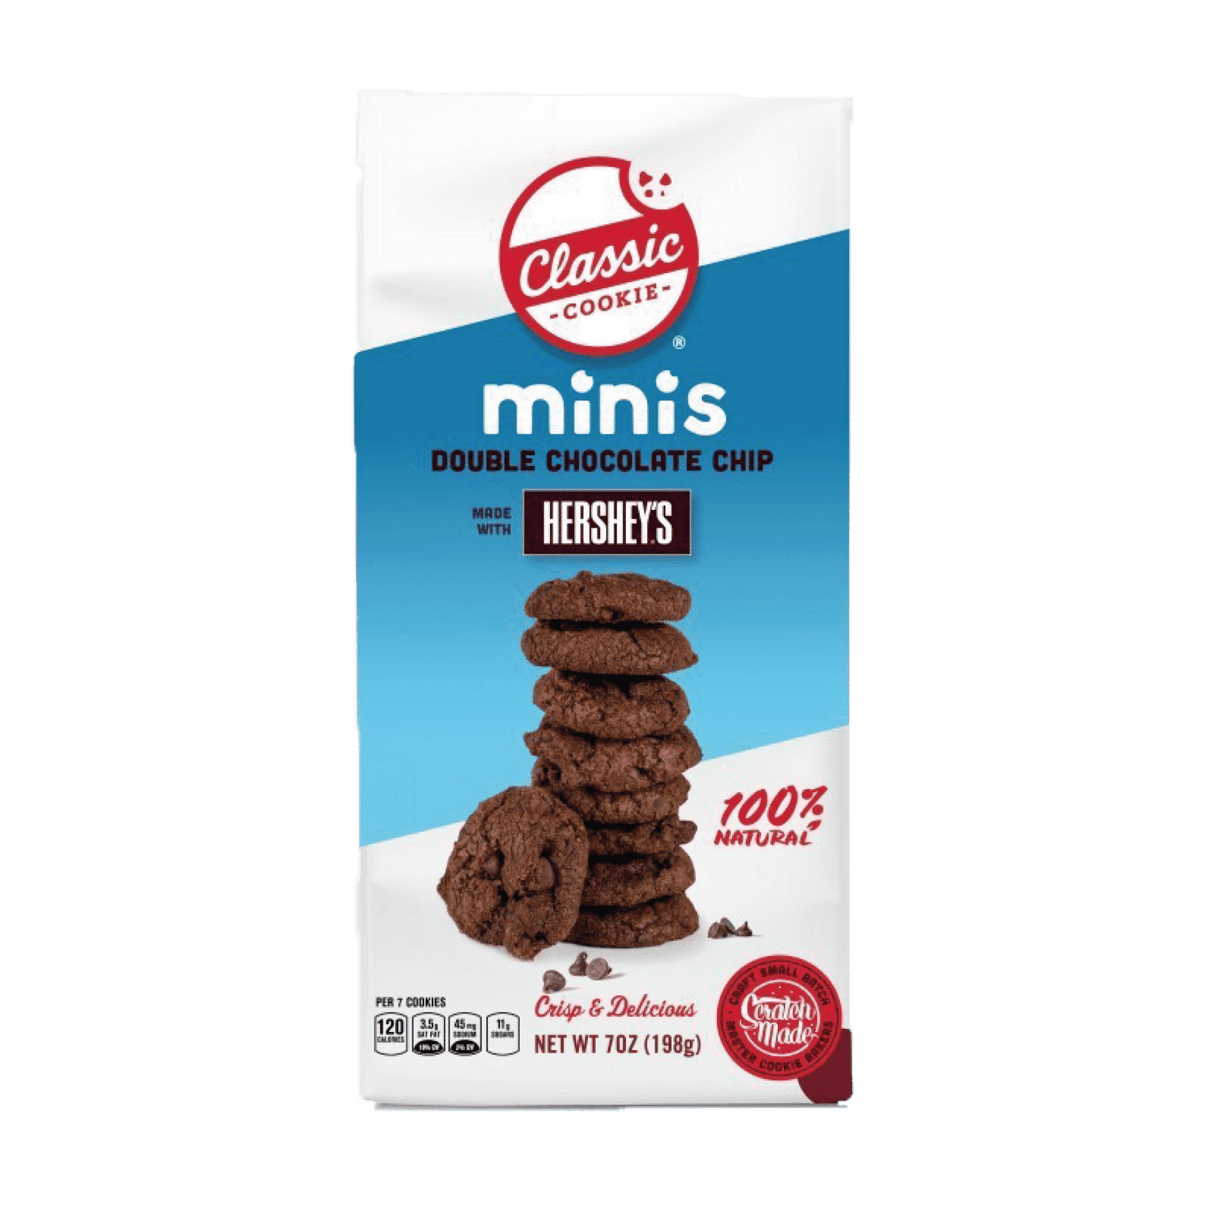 Classic Cookie Mini Cookies Double Chocolate Chip With Hershey's Mini Cookies (198g)